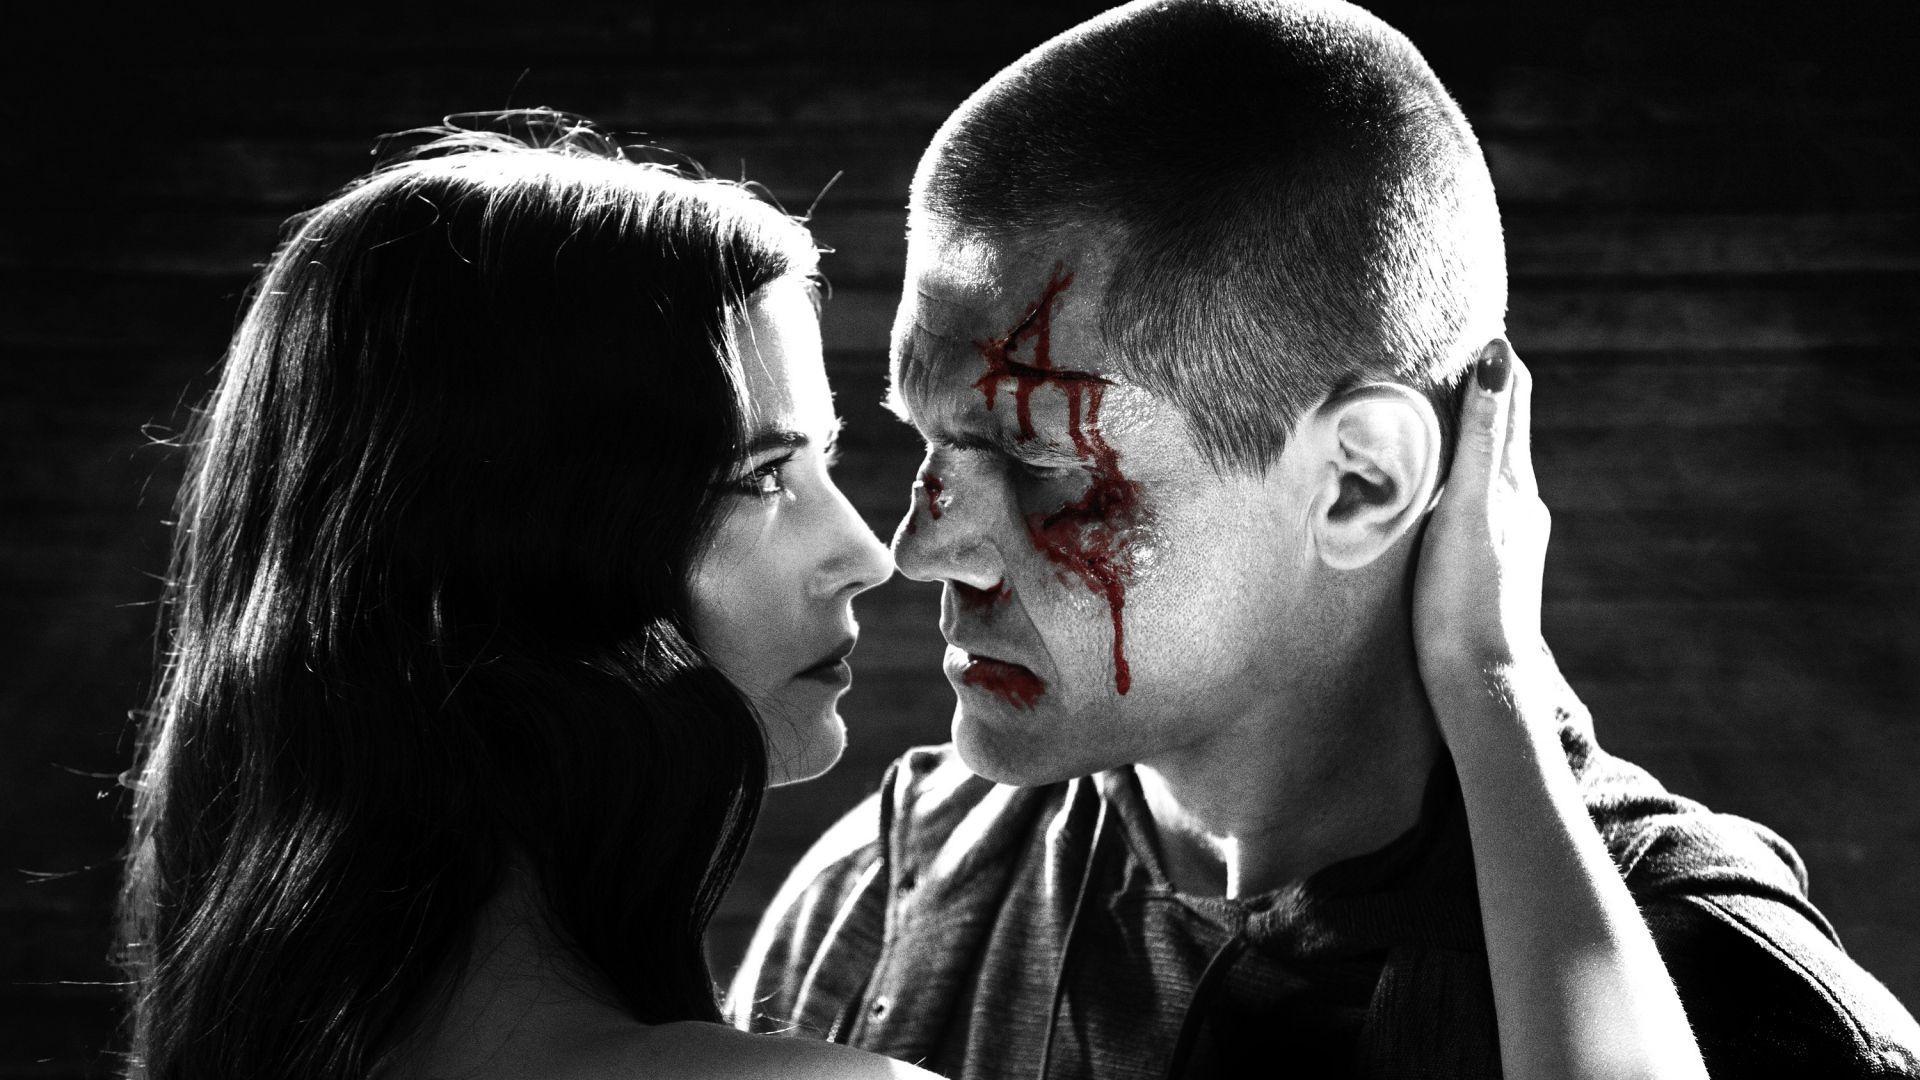 Download Wallpaper 1920x1080 Sin city a dame to kill for, Dwight